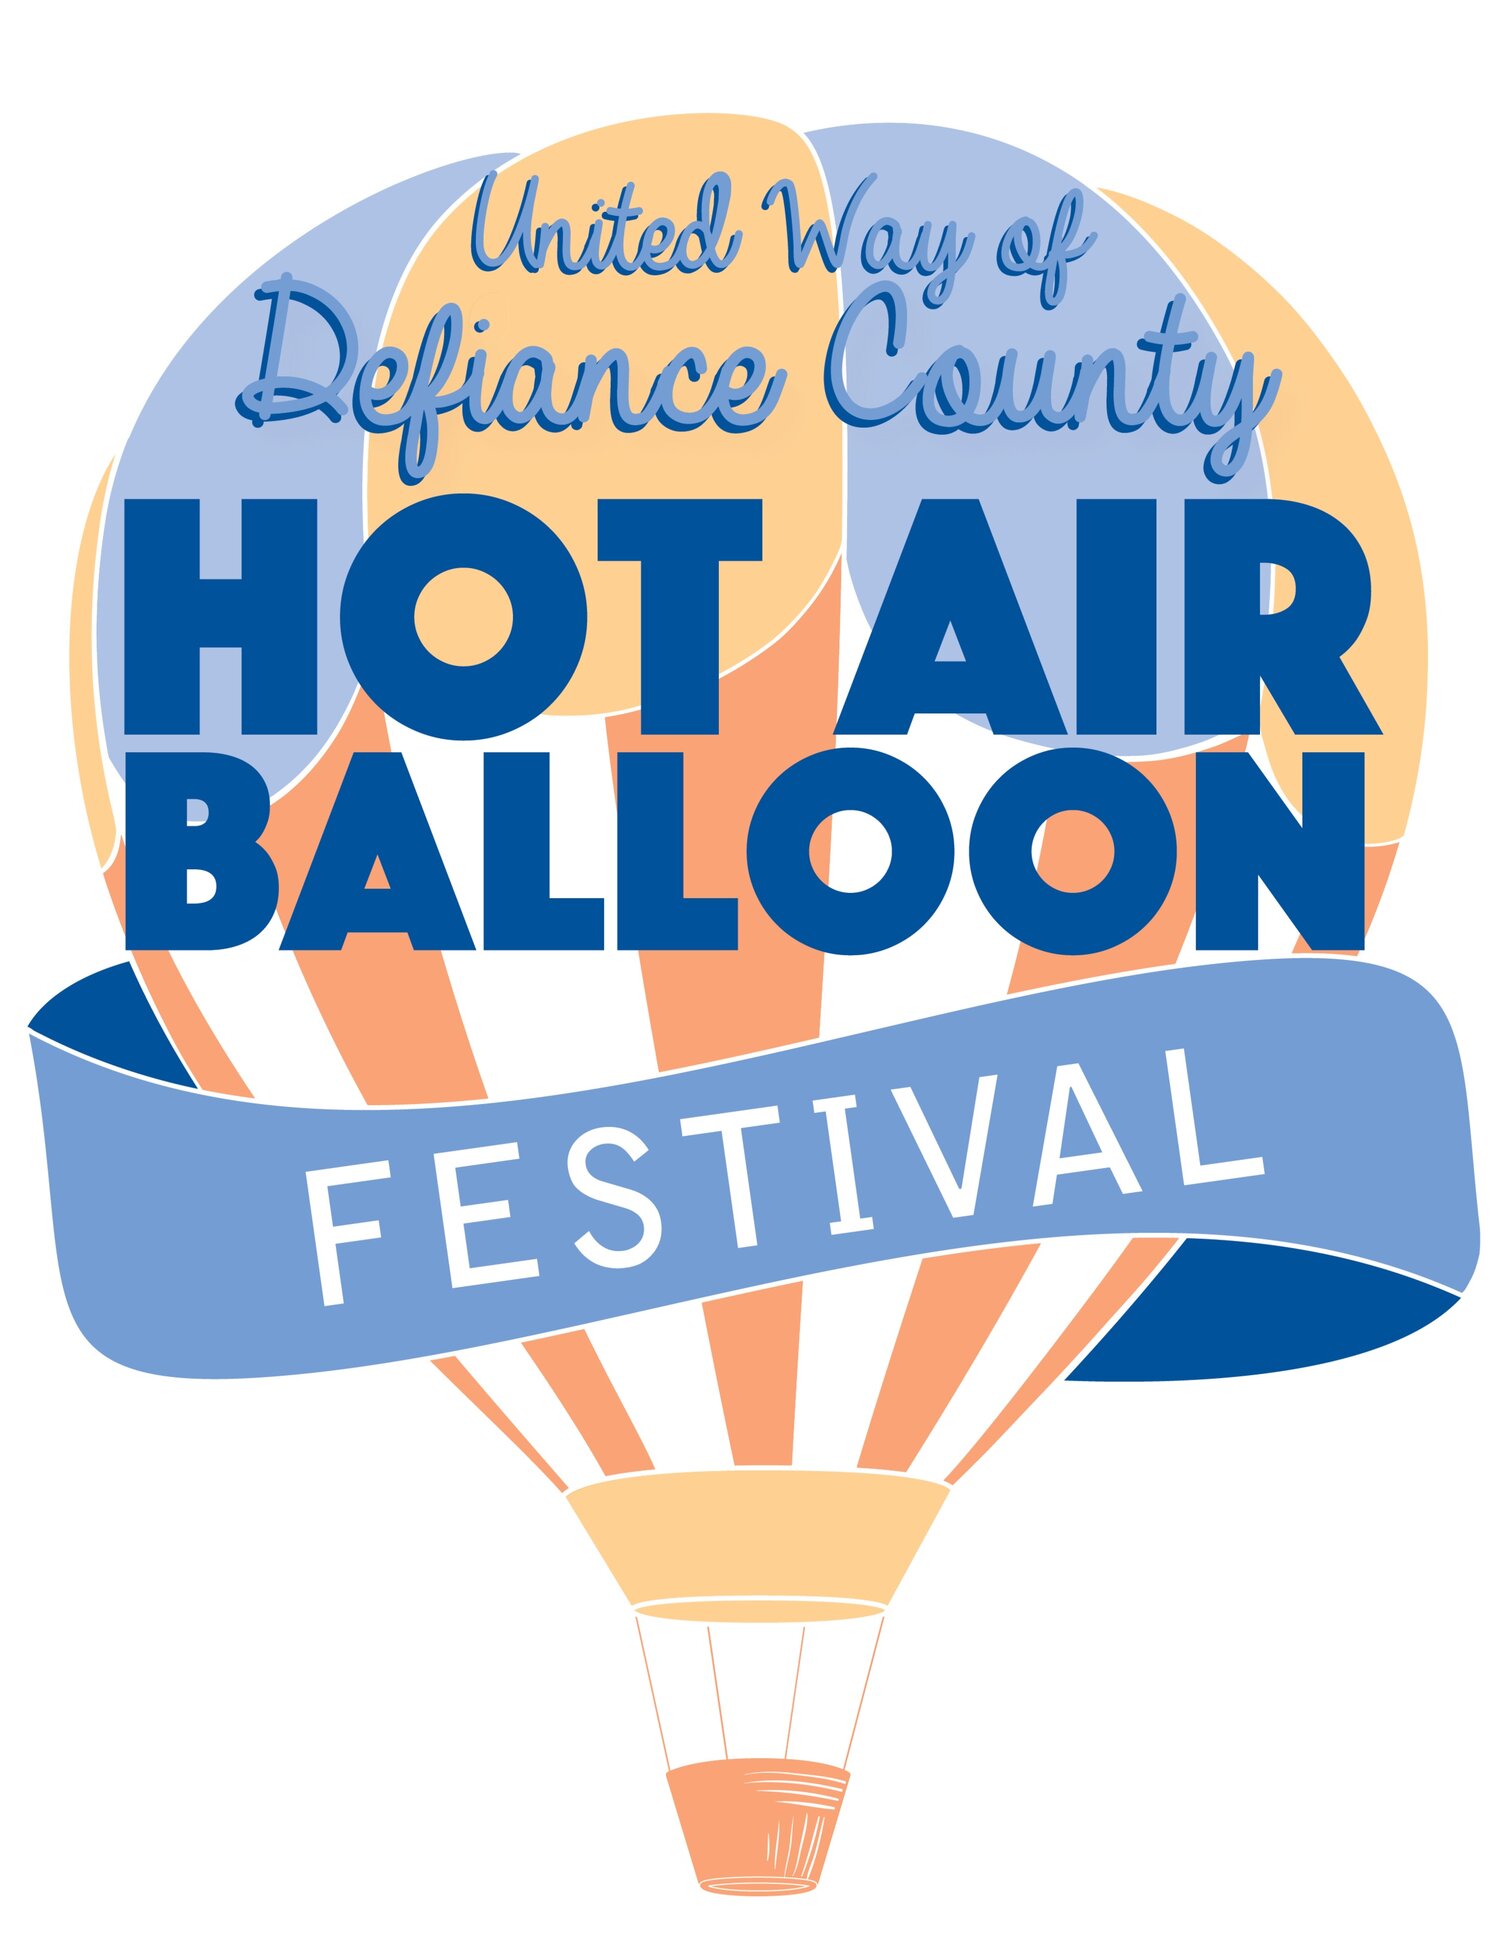 United Way of Defiance County Hot Air Balloon Festival